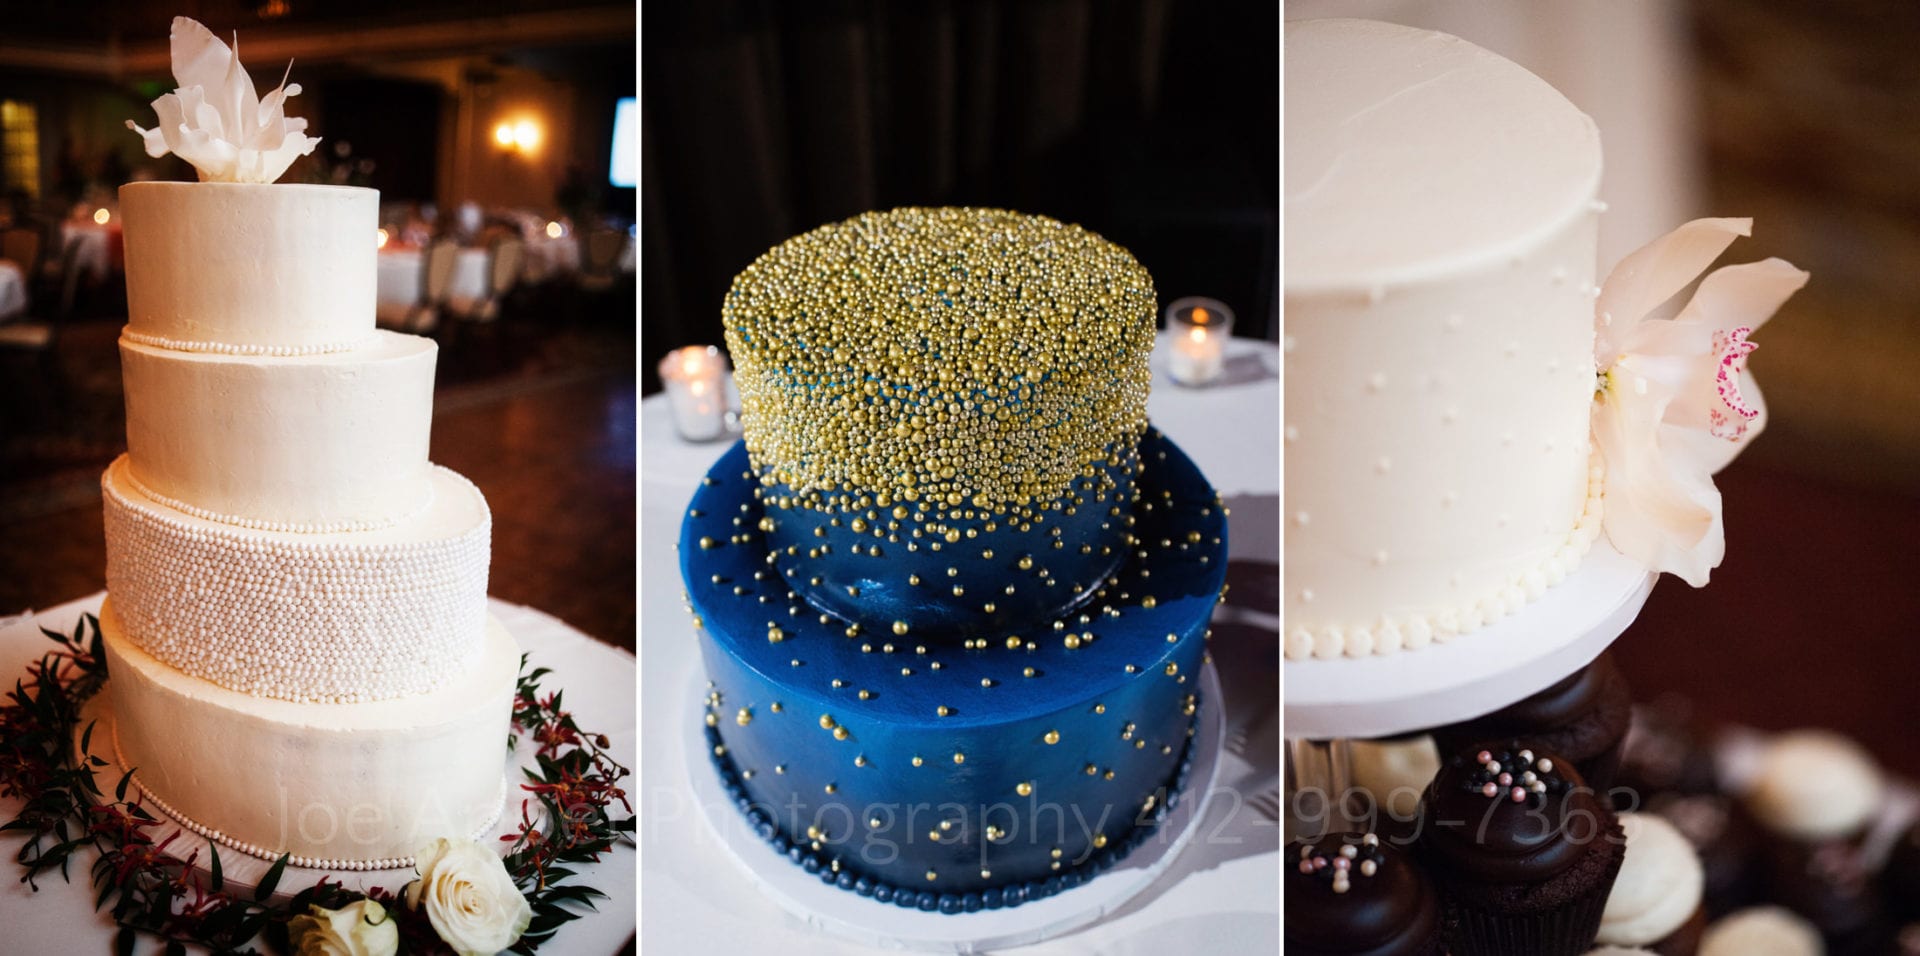 a white tiered wedding cake with pearls next to a blue wedding cake with gold glitter and a white spotted wedding cake with a flower